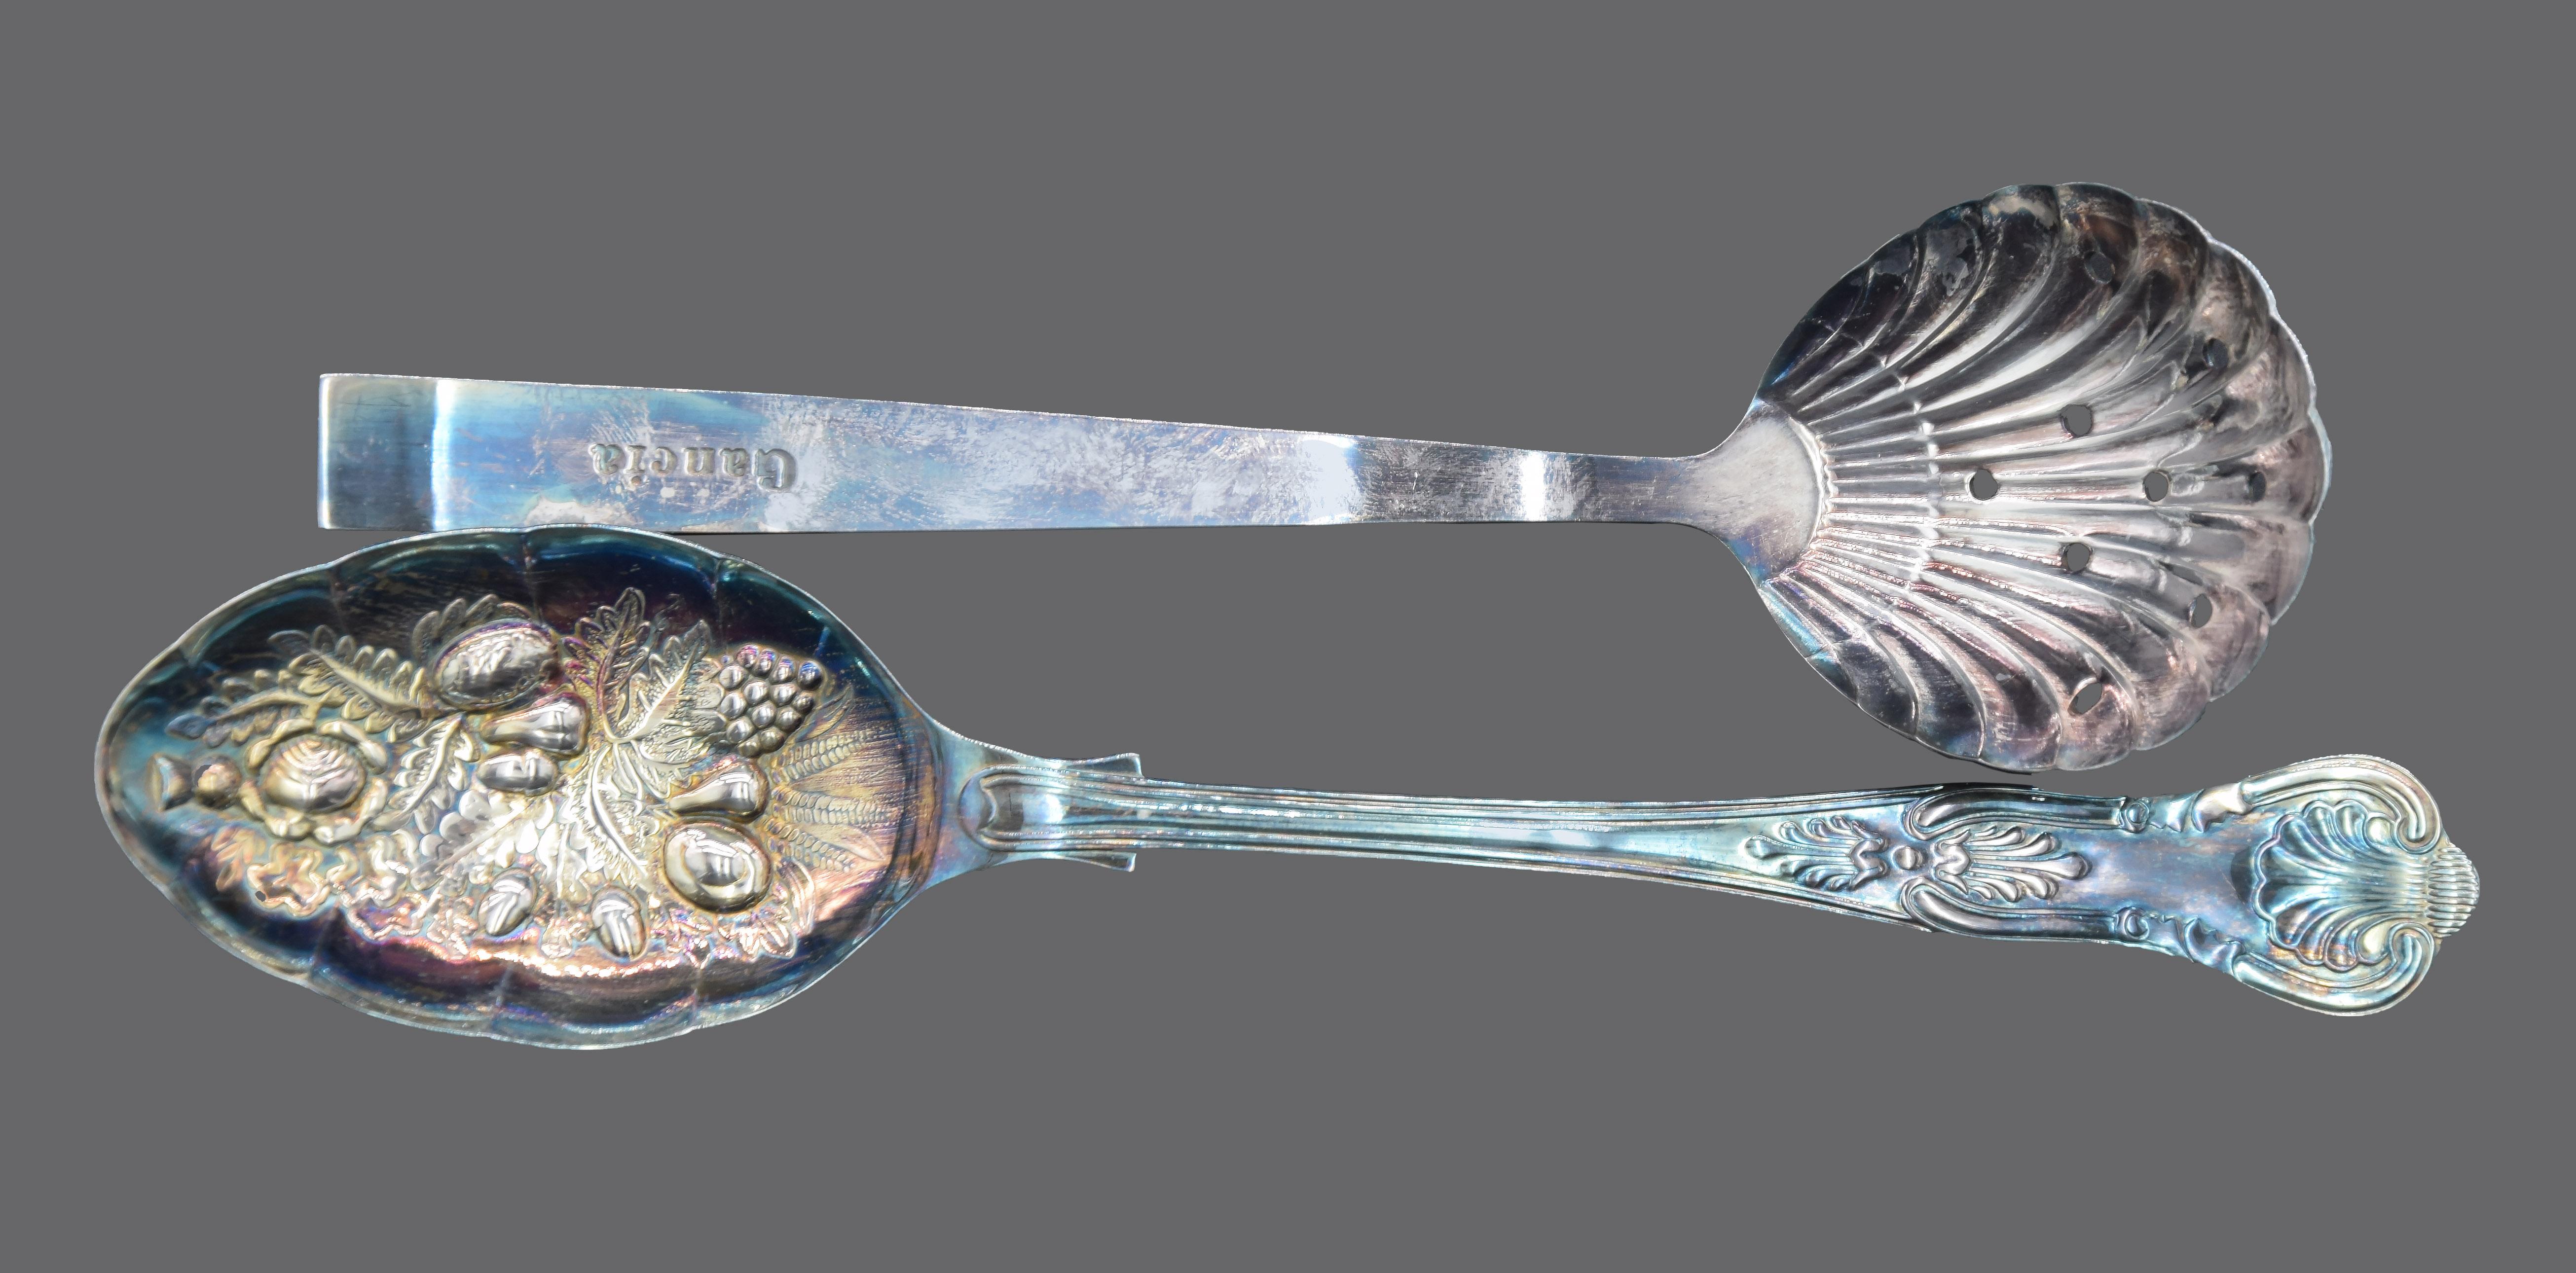 20th century.

The lot consists of two spoons. 

1) Ice spoon perforated shaped shell.

Carved on the front of the handle with the 